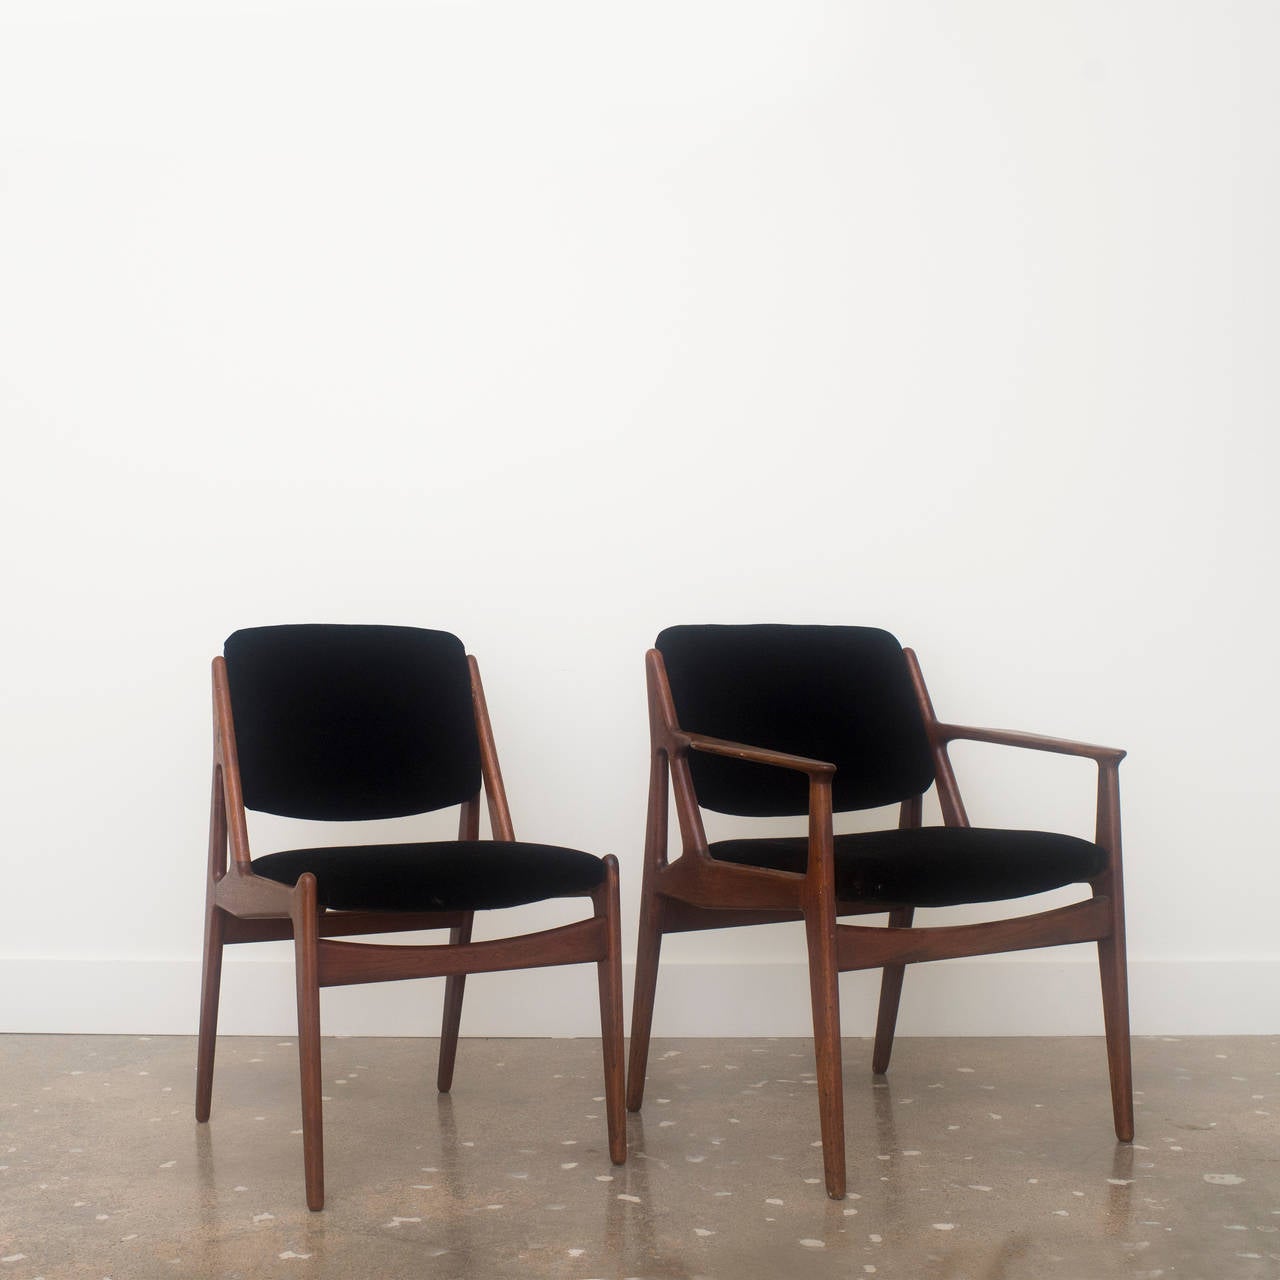 Set of six rosewood Ella dining chairs, including one armchair, with contoured, pivotal backrests. Upholstered seats and backs are in black mohair fabric.